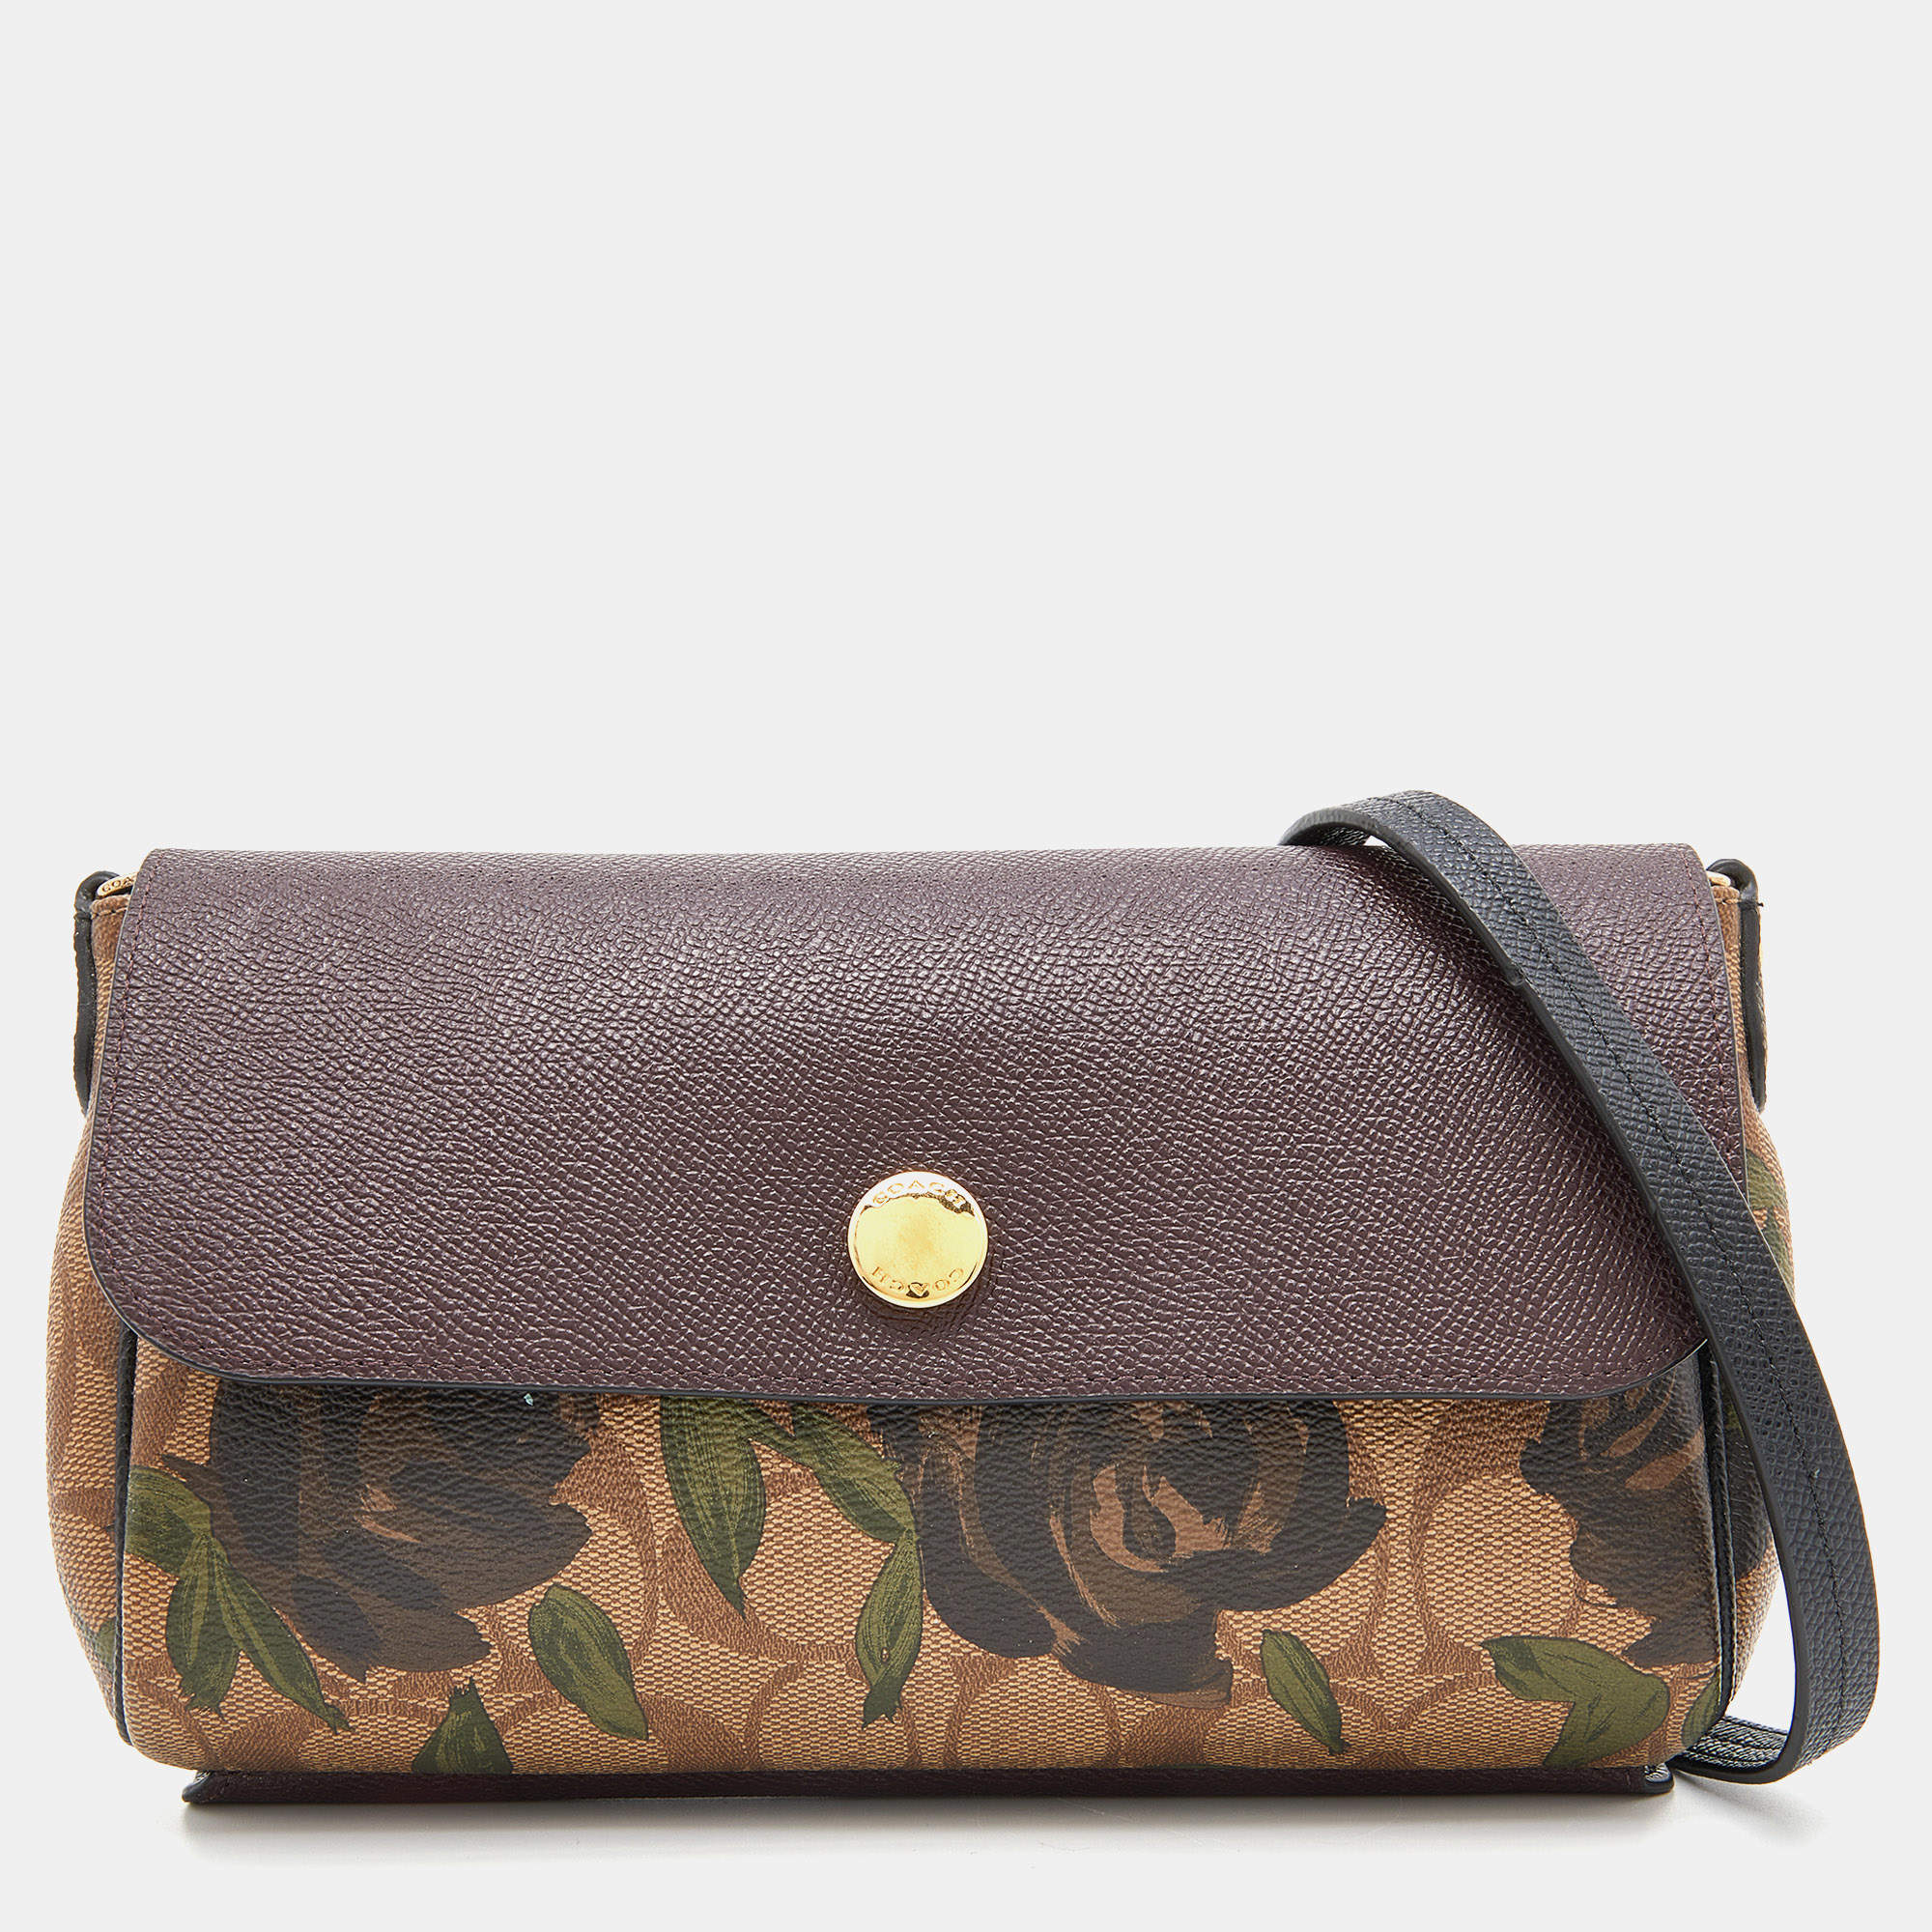 Coach Black/Beige Signature Rose Print Coated Canvas and Leather Reversible  Flap Crossbody Bag Coach